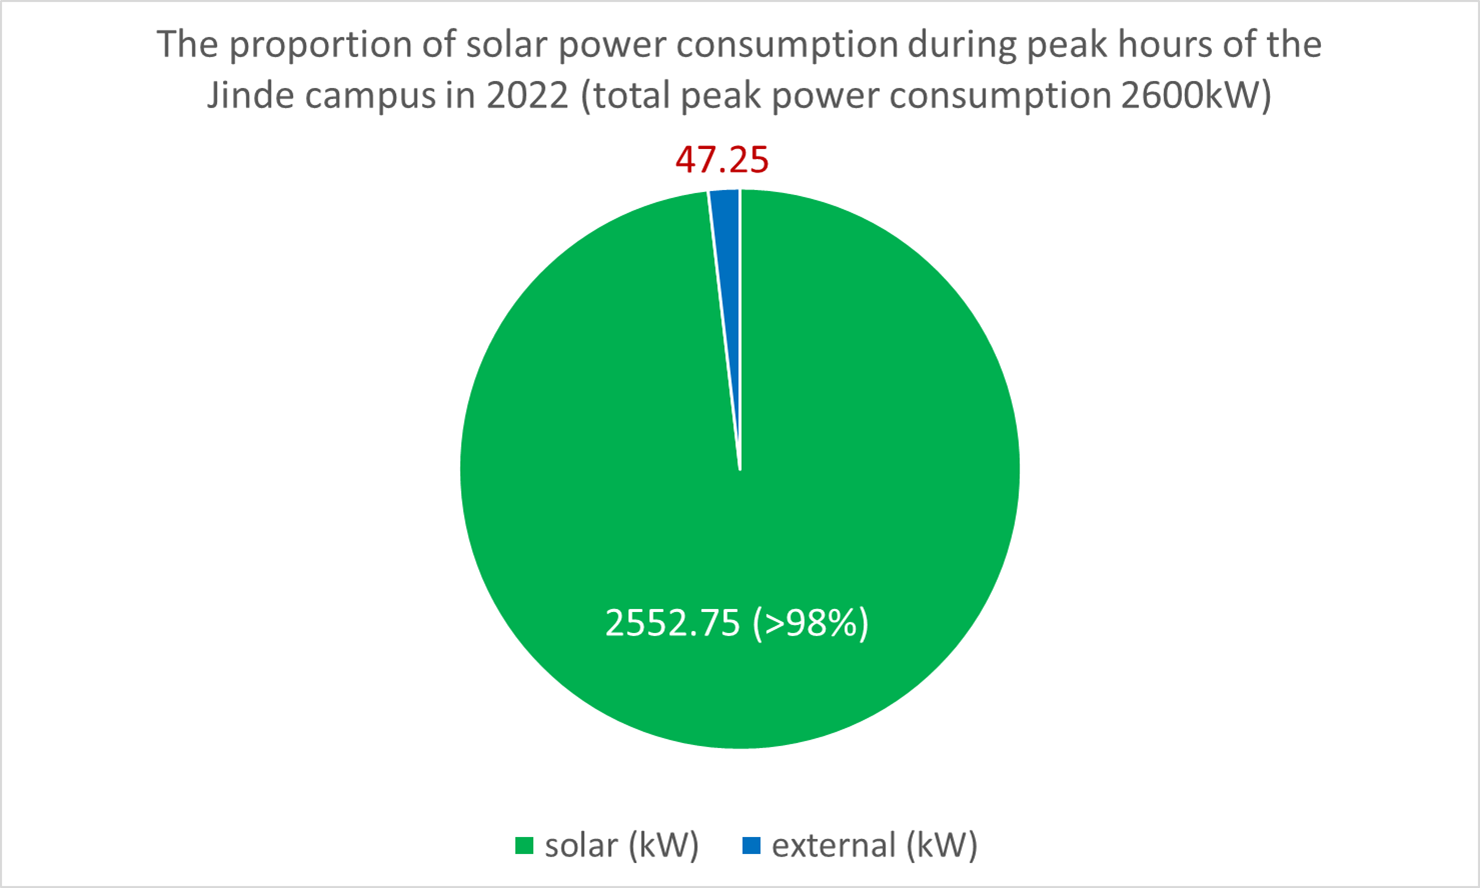 Figure 3. The proportion of solar power consumption during peak hours of the Jinde campus in 2022